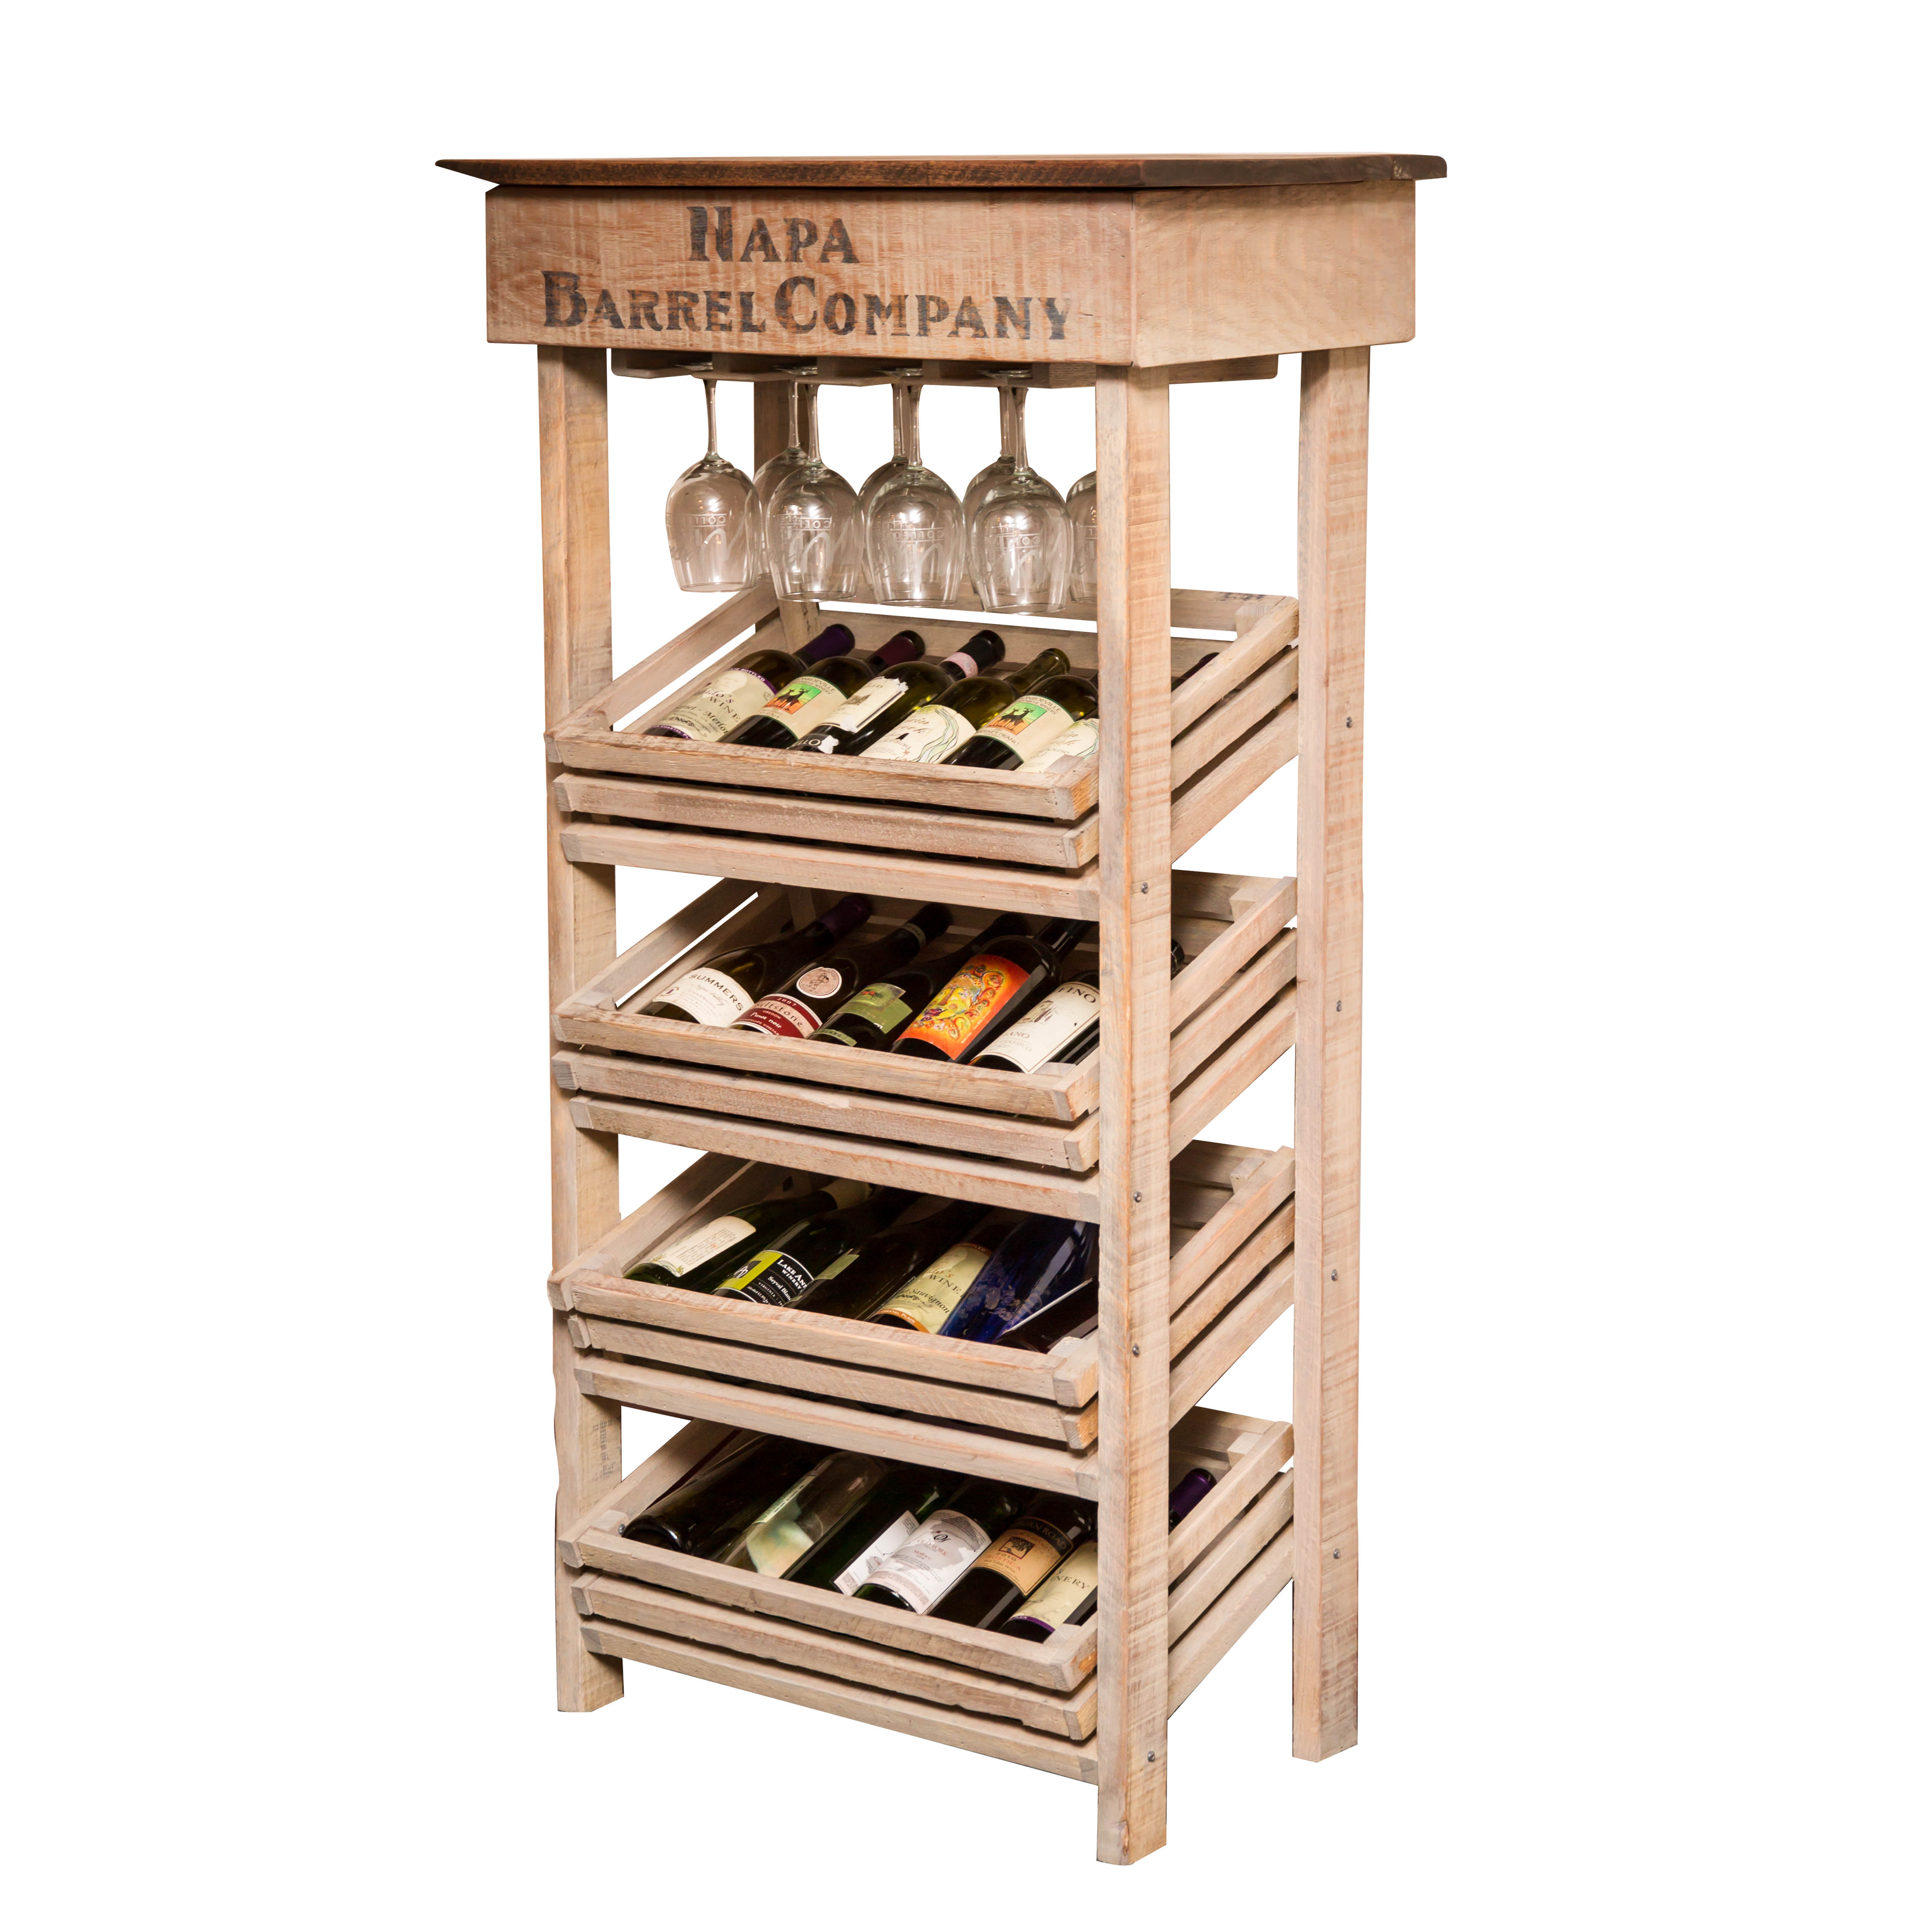 Image of: Pictures Of Wine Racks